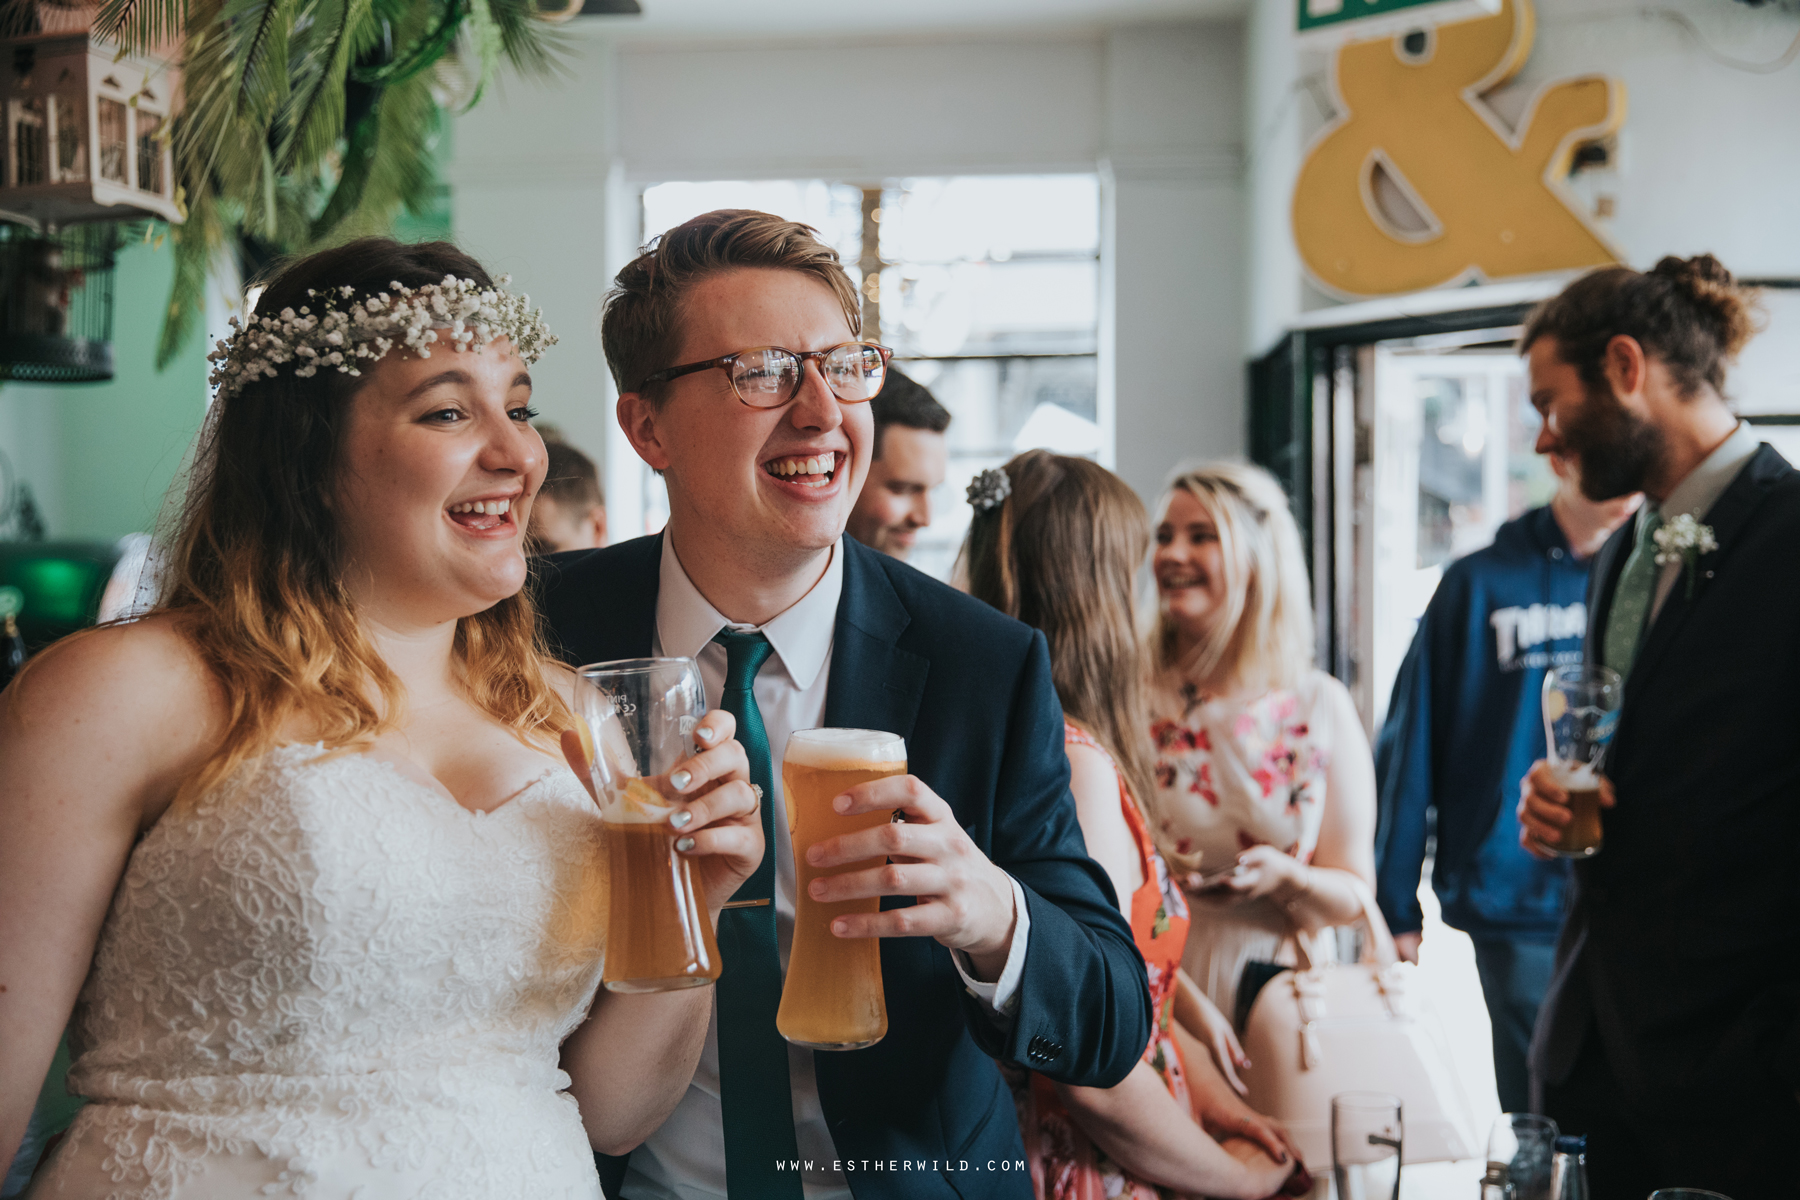 Norwich_Castle_Arcade_Grosvenor_Chip_Birdcage_Cathedral_Cloisters_Refectory_Wedding_Photography_Esther_Wild_Photographer_Norfolk_Kings_Lynn_3R8A1591.jpg